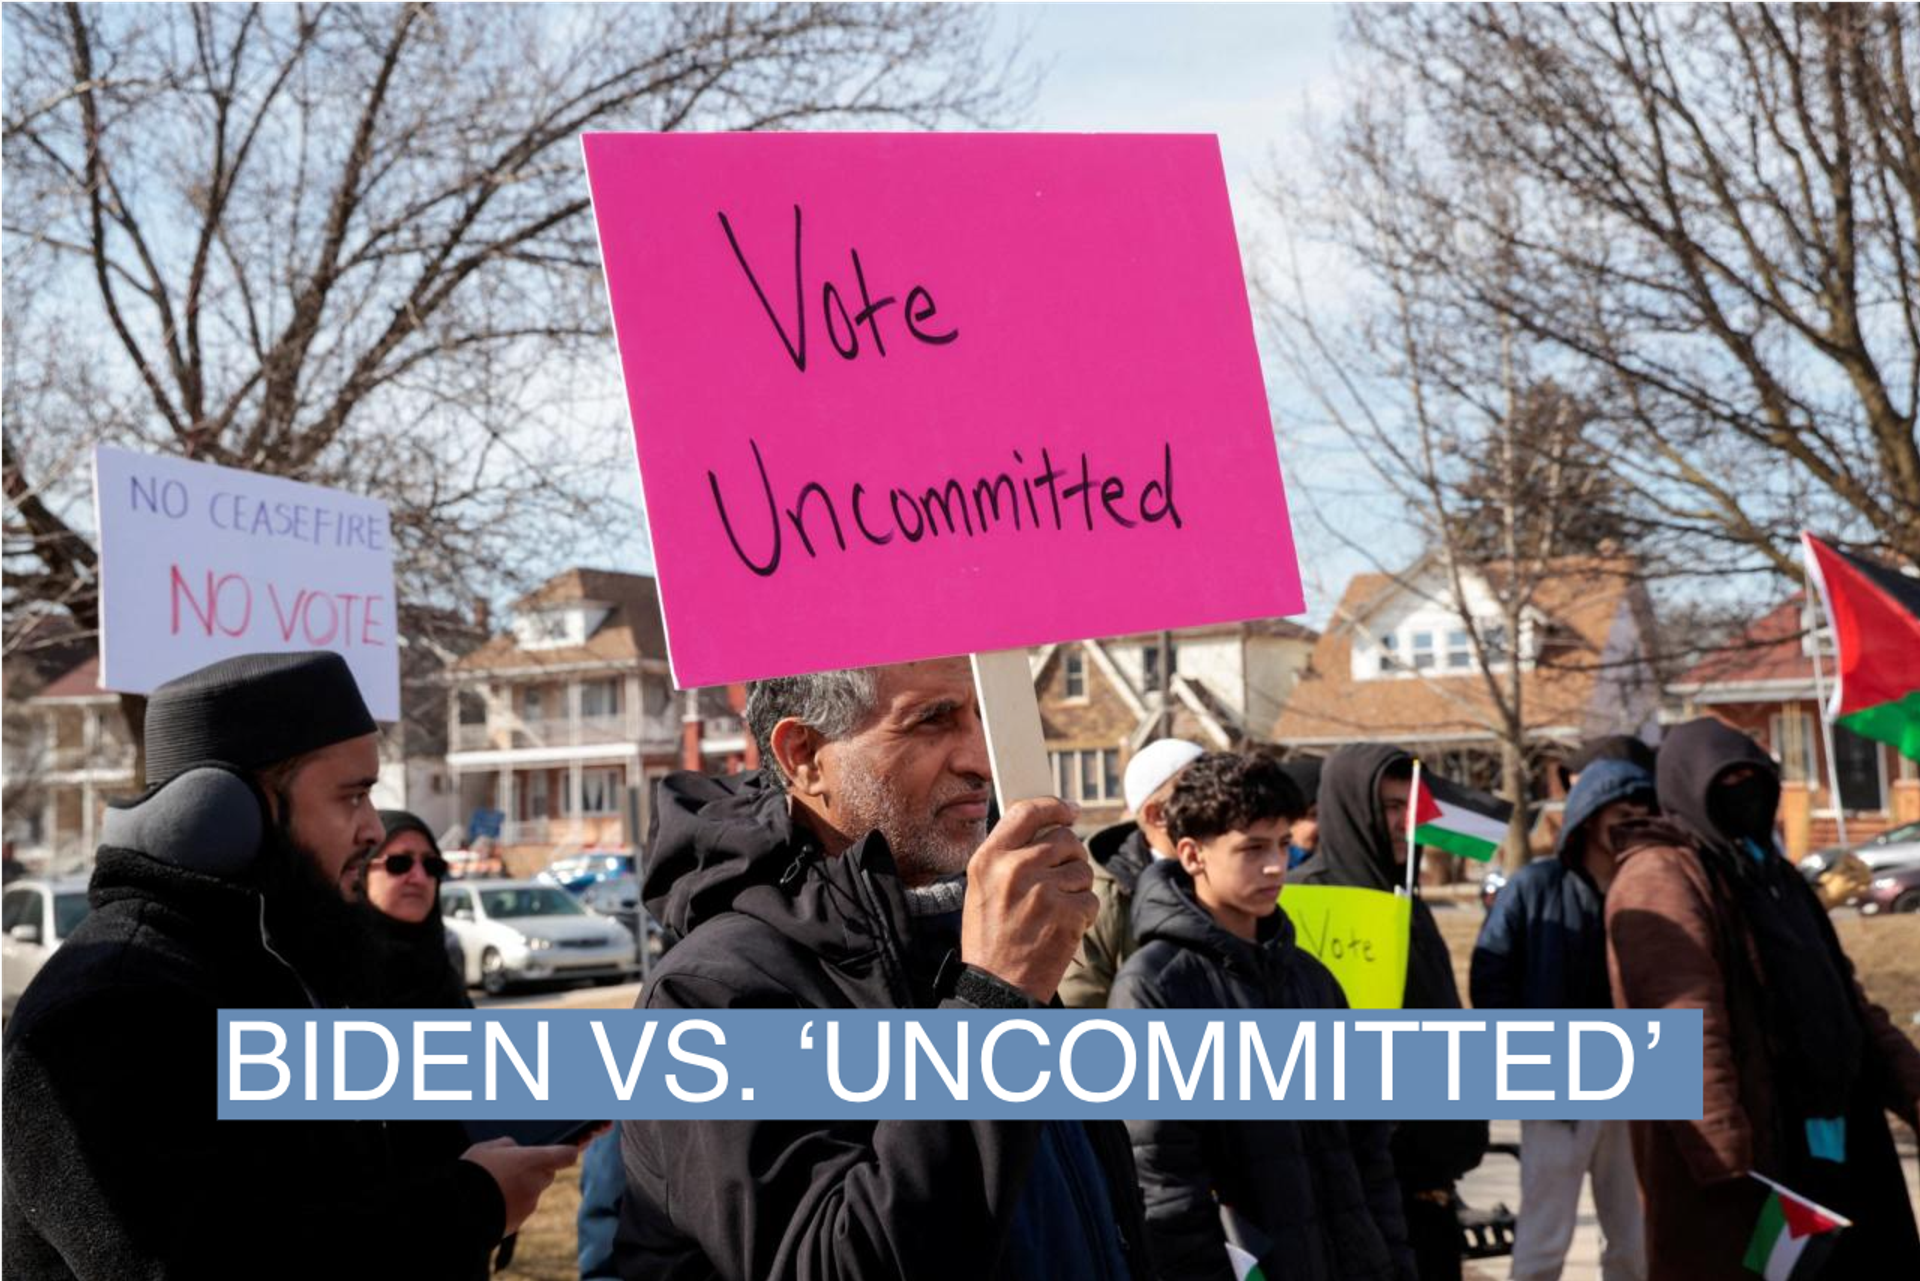 Supporters of the campaign to vote “uncommitted" hold a rally in support of Palestinians in Gaza, ahead of Michigan's Democratic presidential primary election in Hamtramck, Mich., on Feb. 25, 2024.